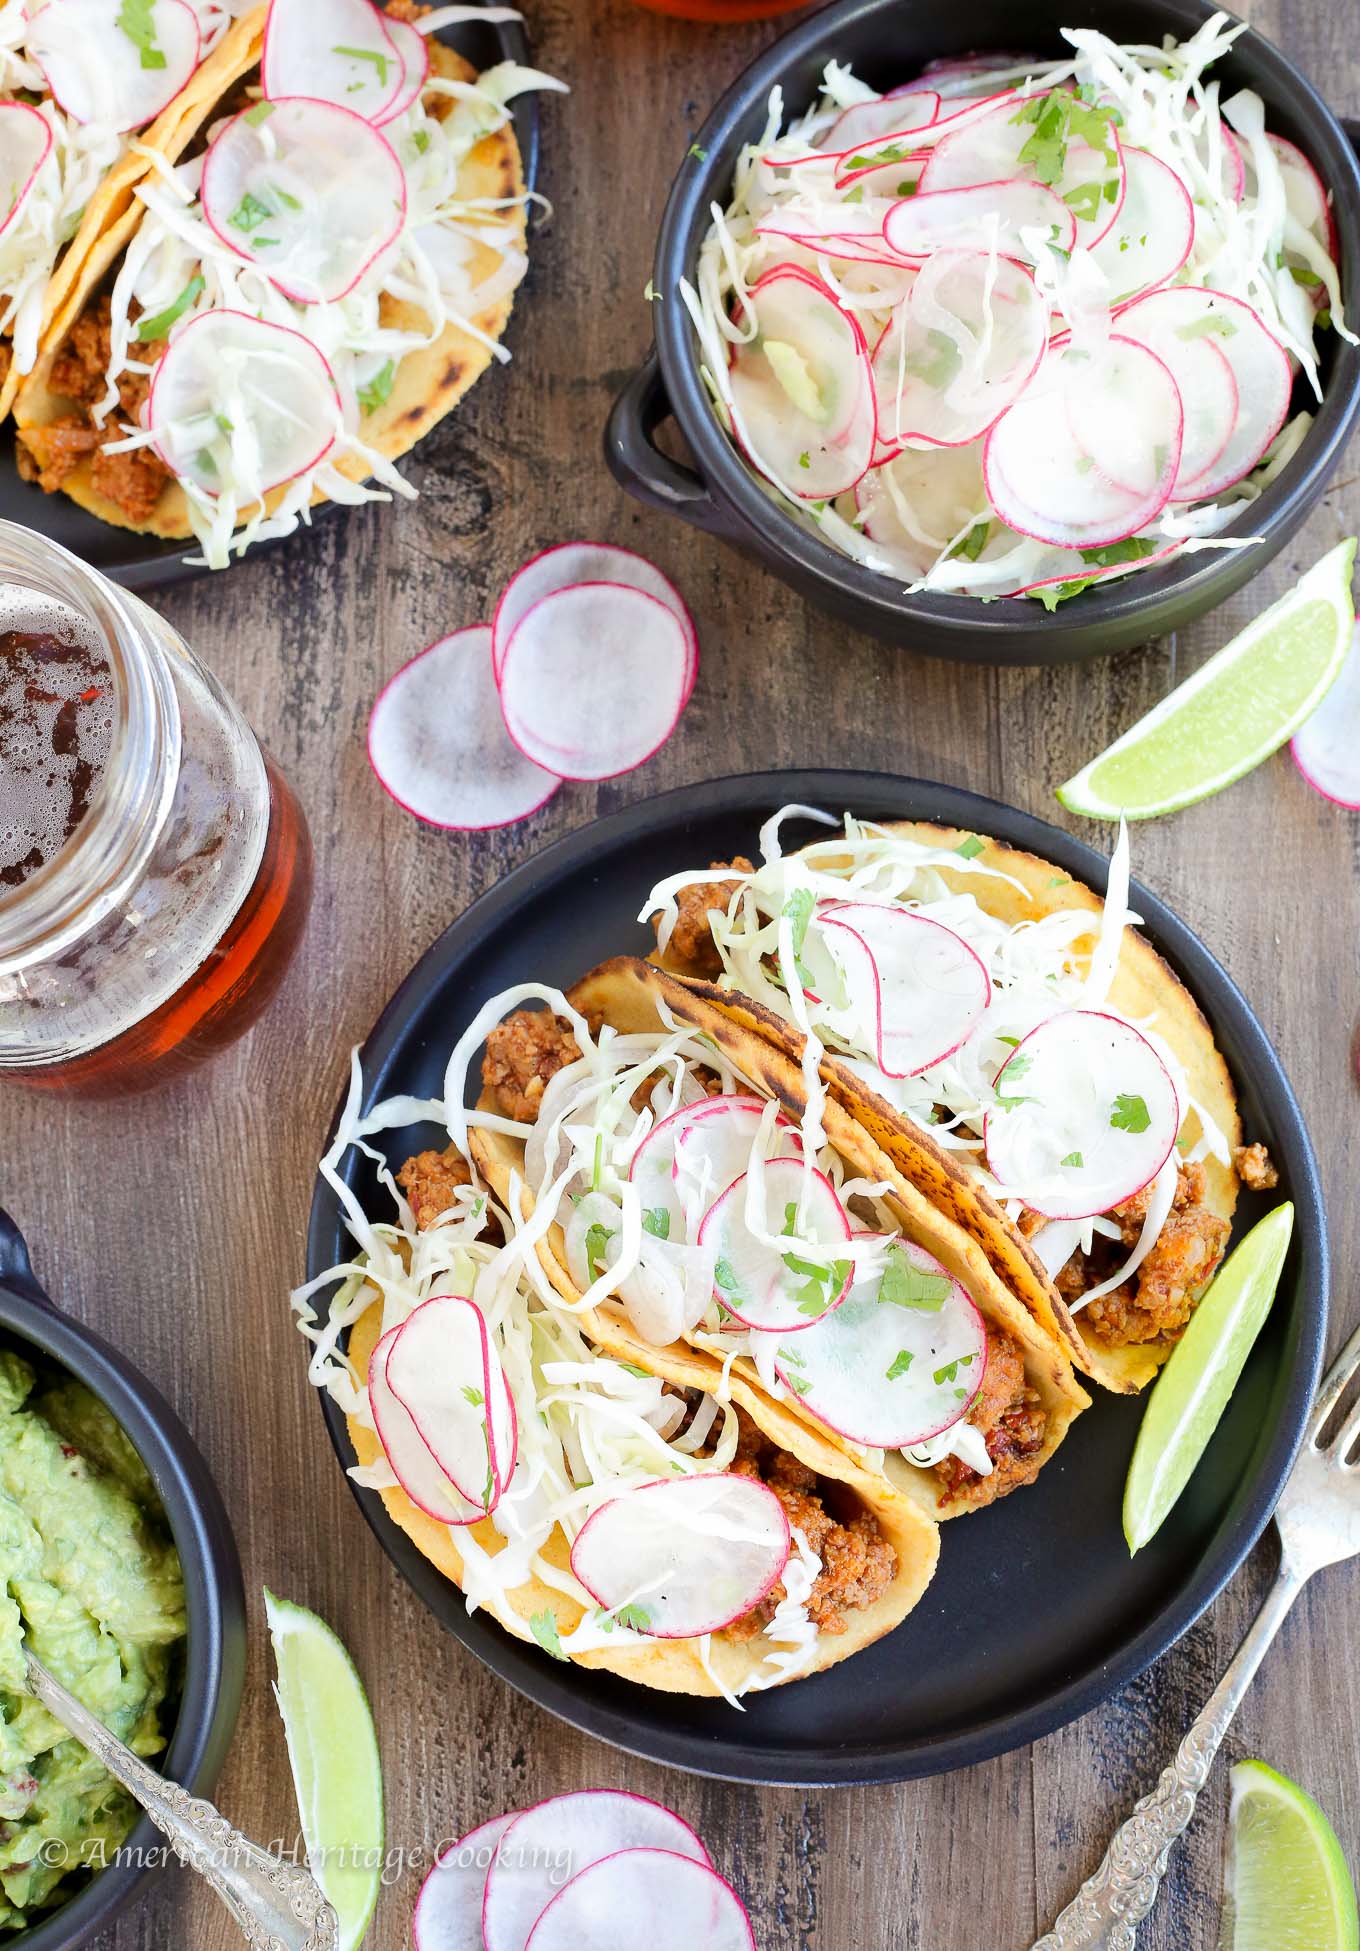 These Chipotle Chorizo Tacos are smoky, spicy and complex! The homemade sweet potato tortilla temper the spice with a little bit of sweetness and a mezcal lime slaw brightens the flavors and pulls the whole taco together!